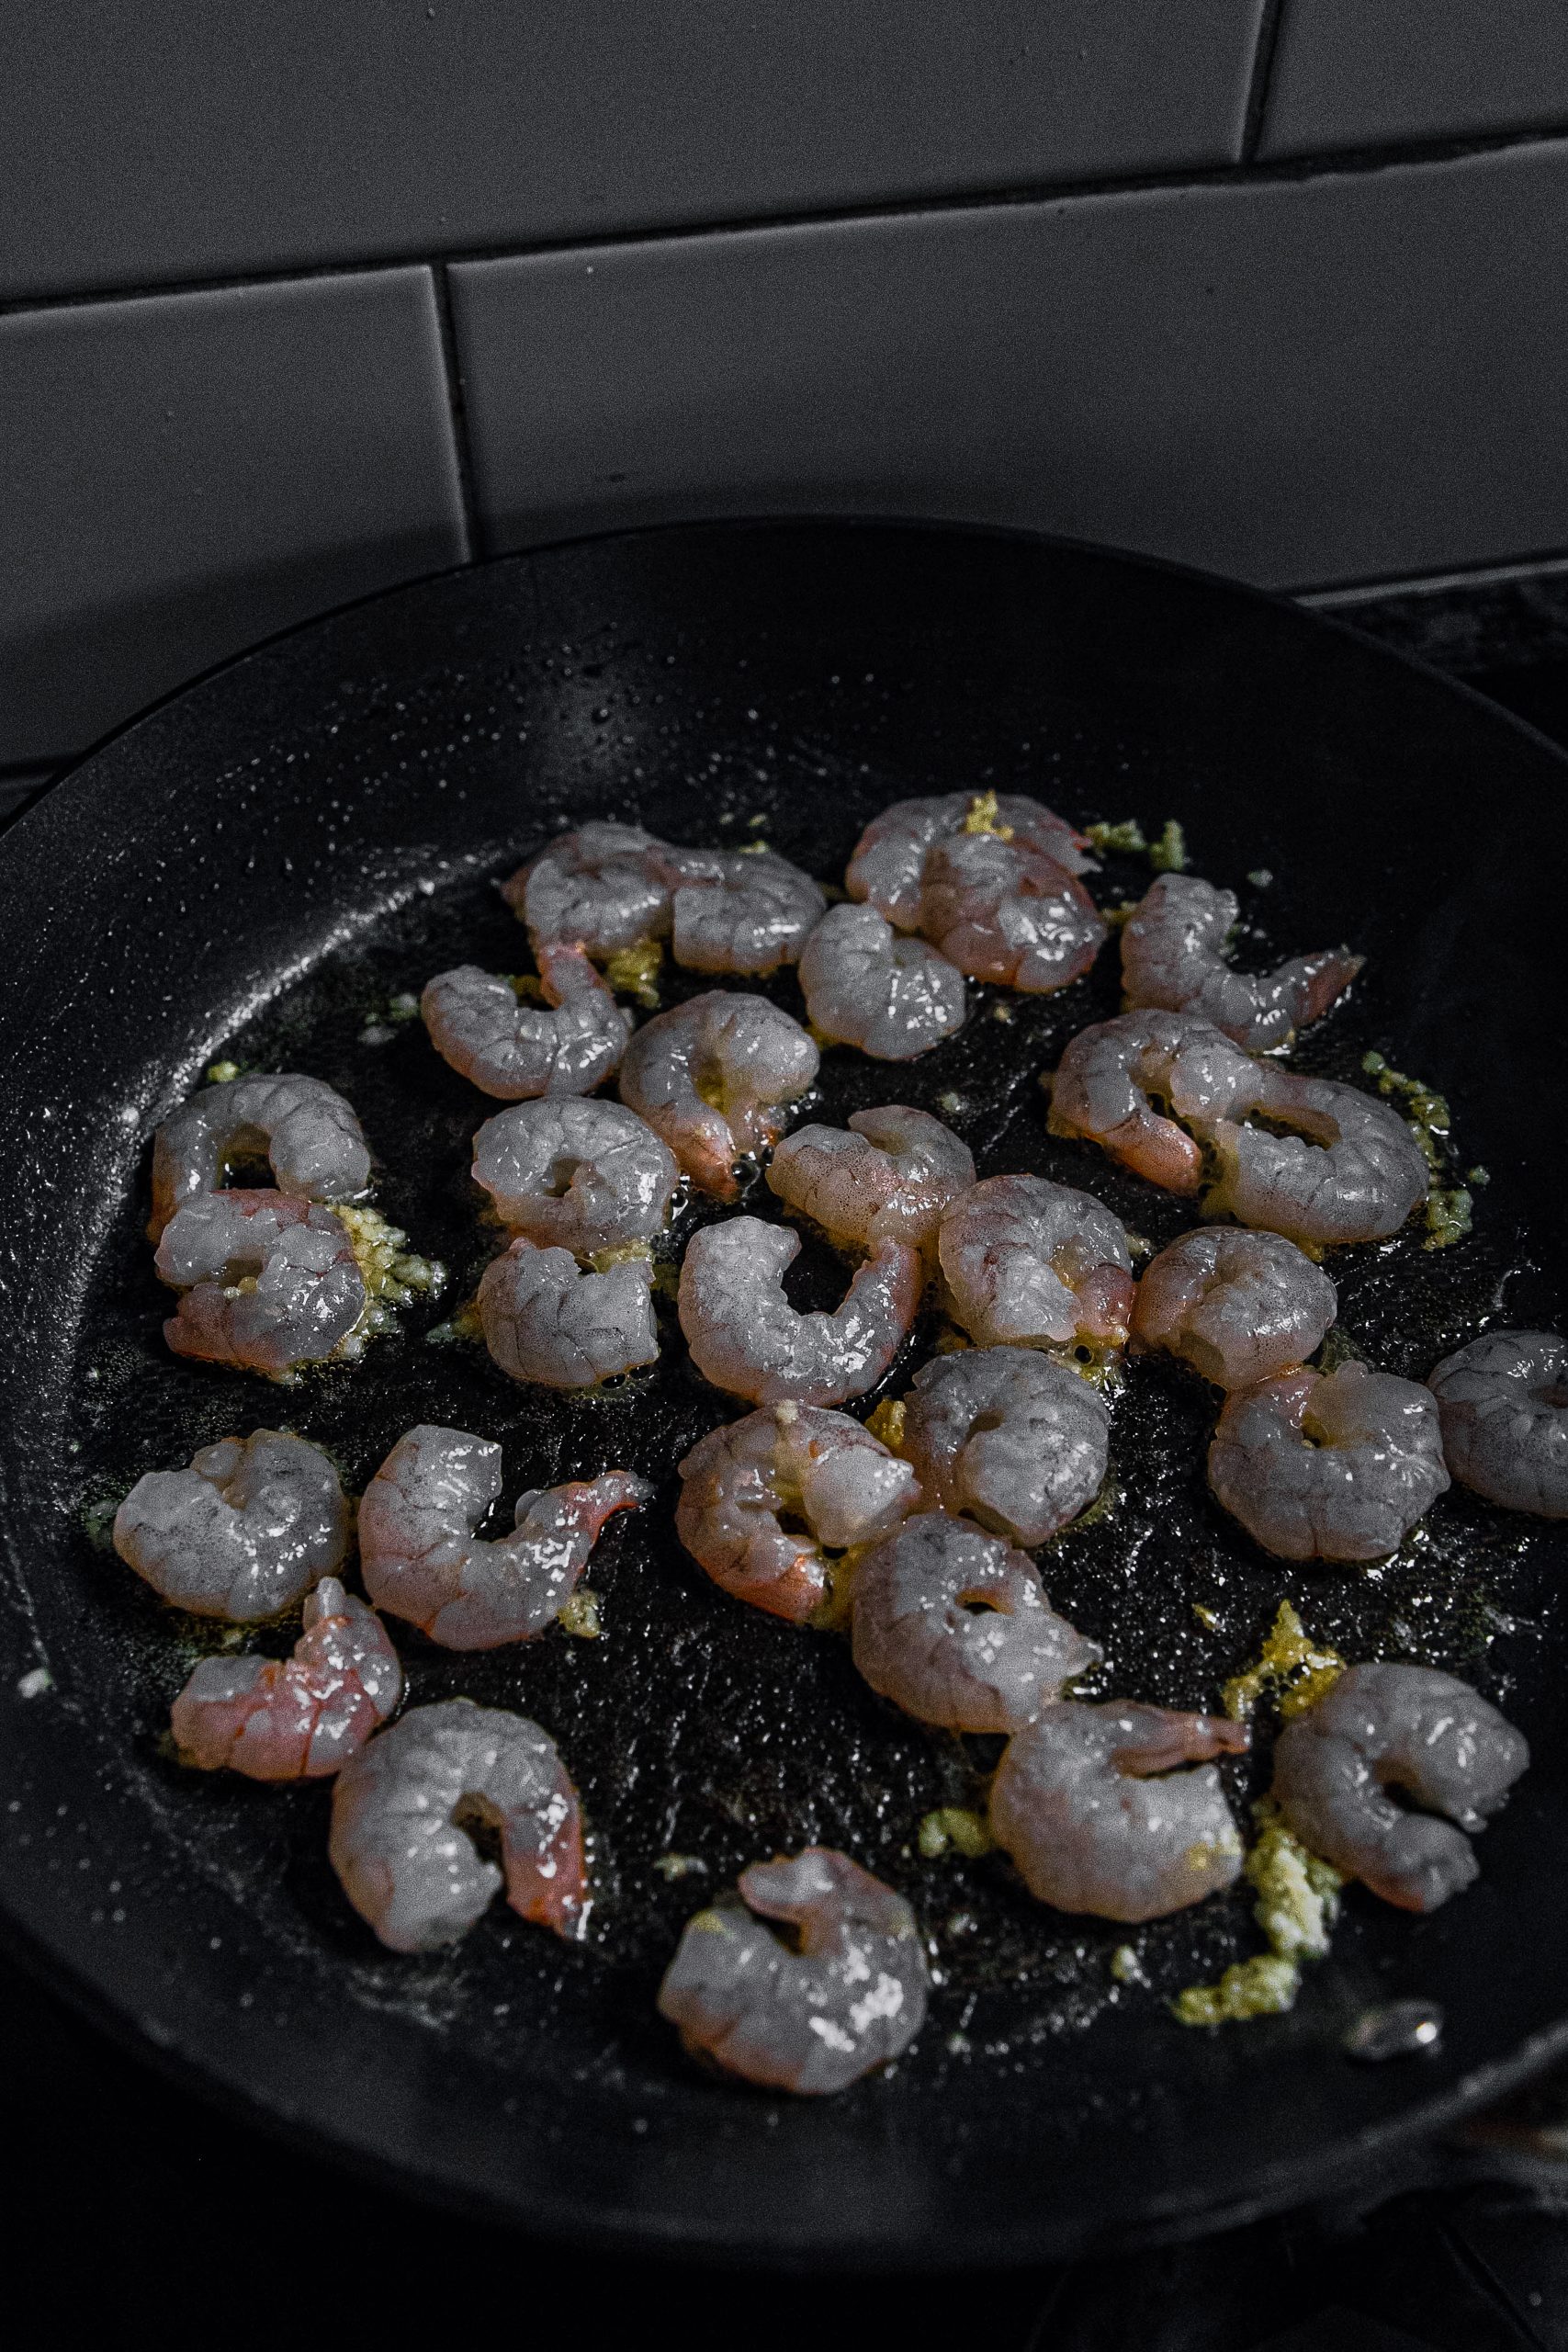 Add shrimp to the pan. Cook shrimp for a minute or so, stirring a few times.